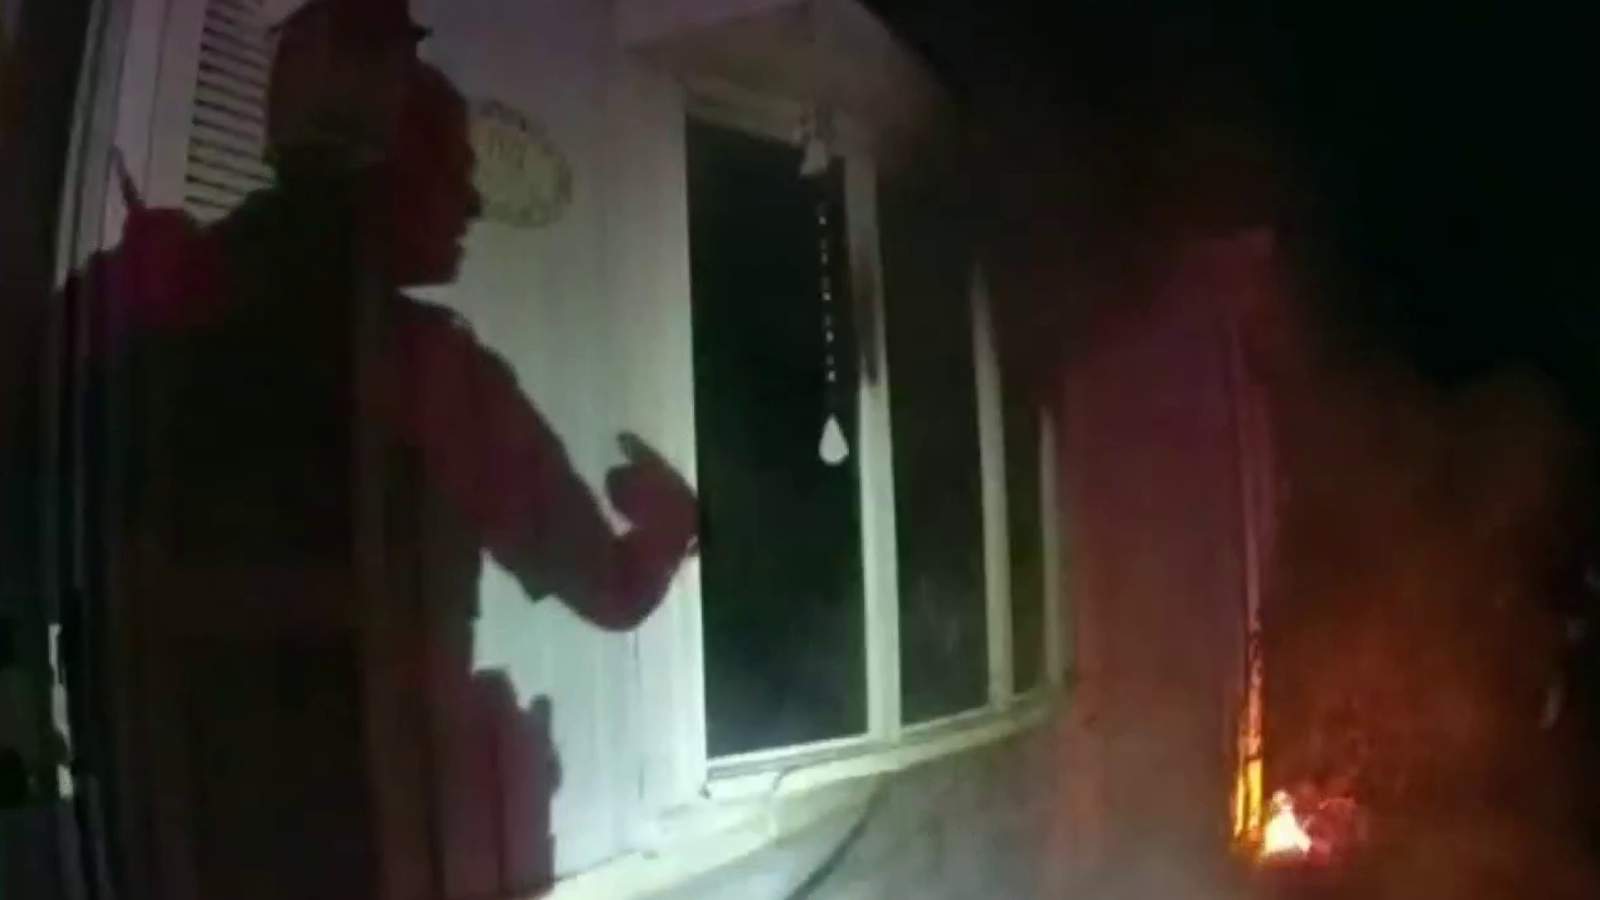 Video: Police pull 74-year-old woman out of burning house in Royal Oak